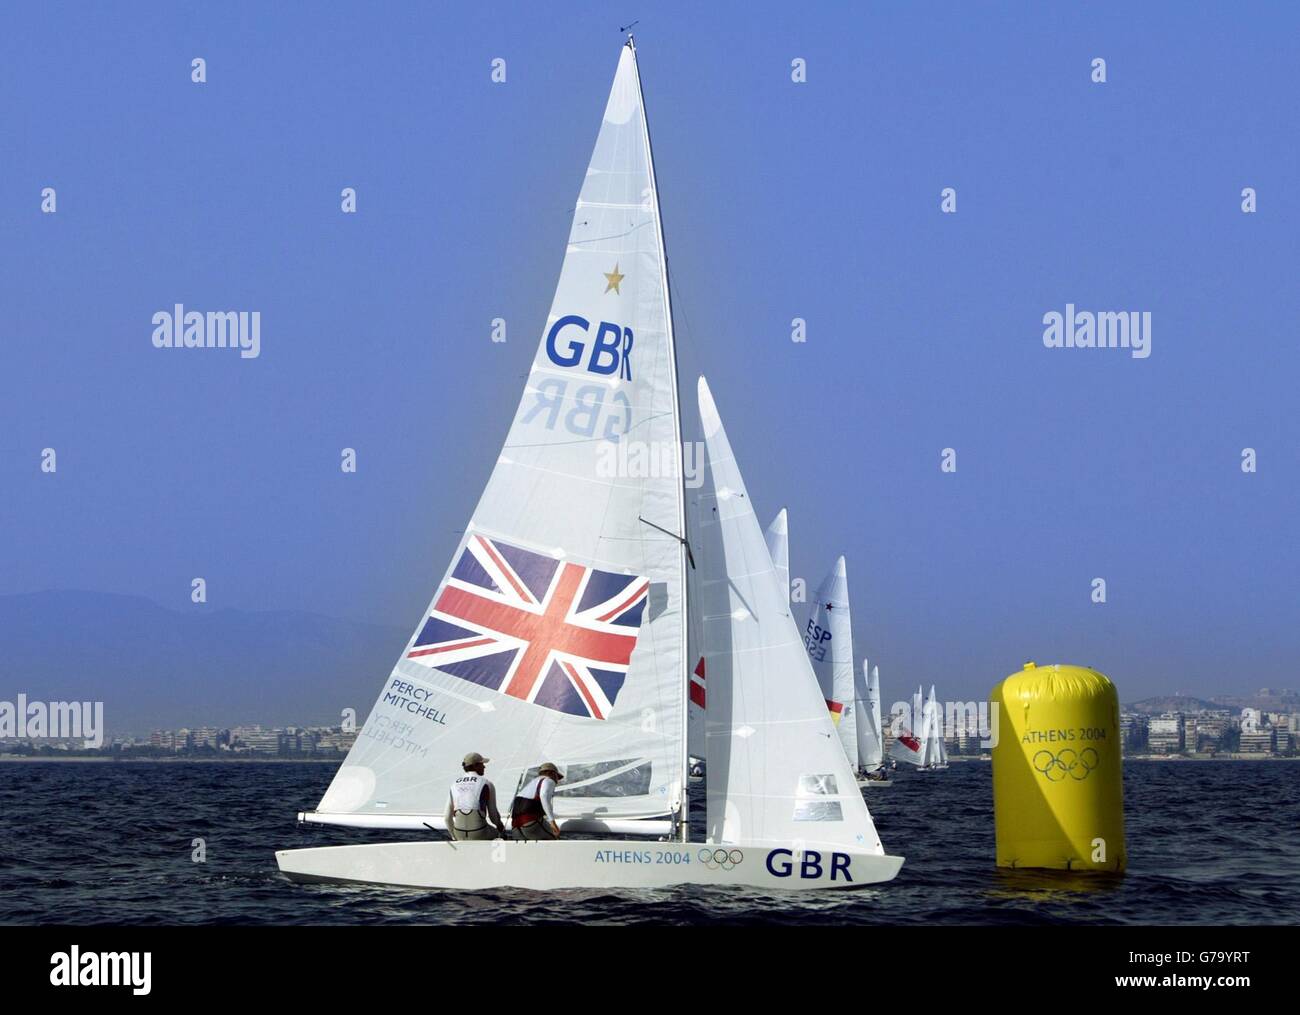 Great Britain's Iain Percy and Steve Mitchell compete in the Star class at the Agios Kosmas Olympic Sailing Centre in Athens, Greece, during the Olympic Games. Stock Photo